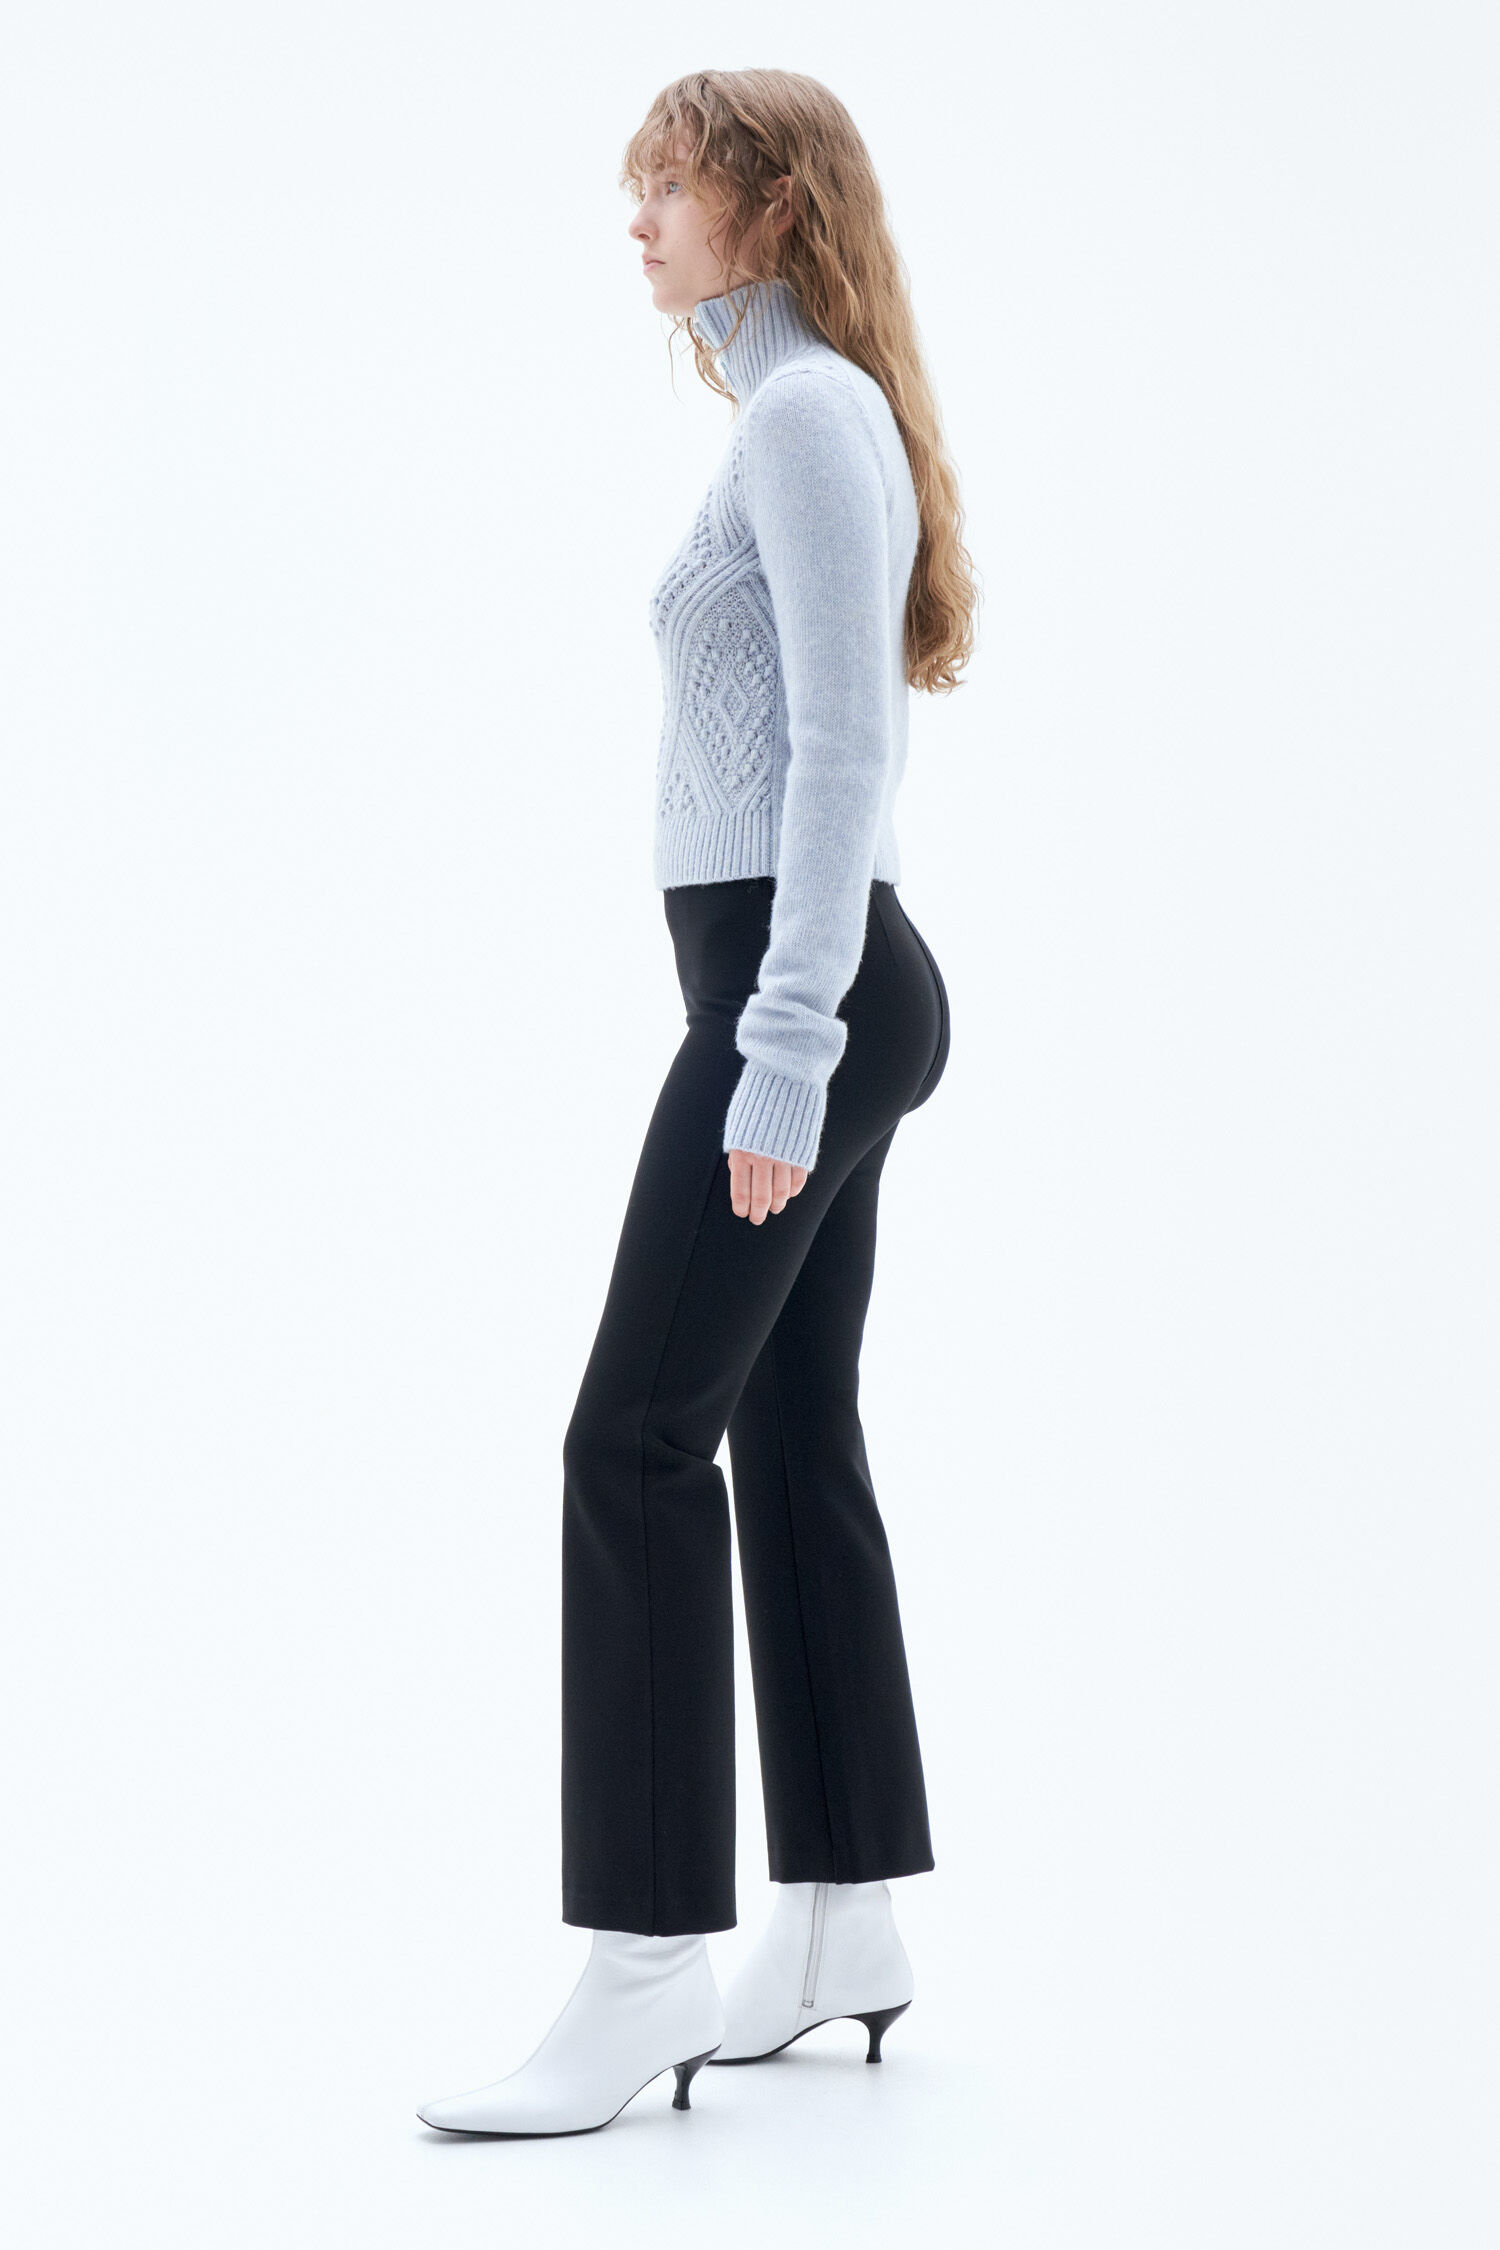 Flared Jersey Trousers - Black